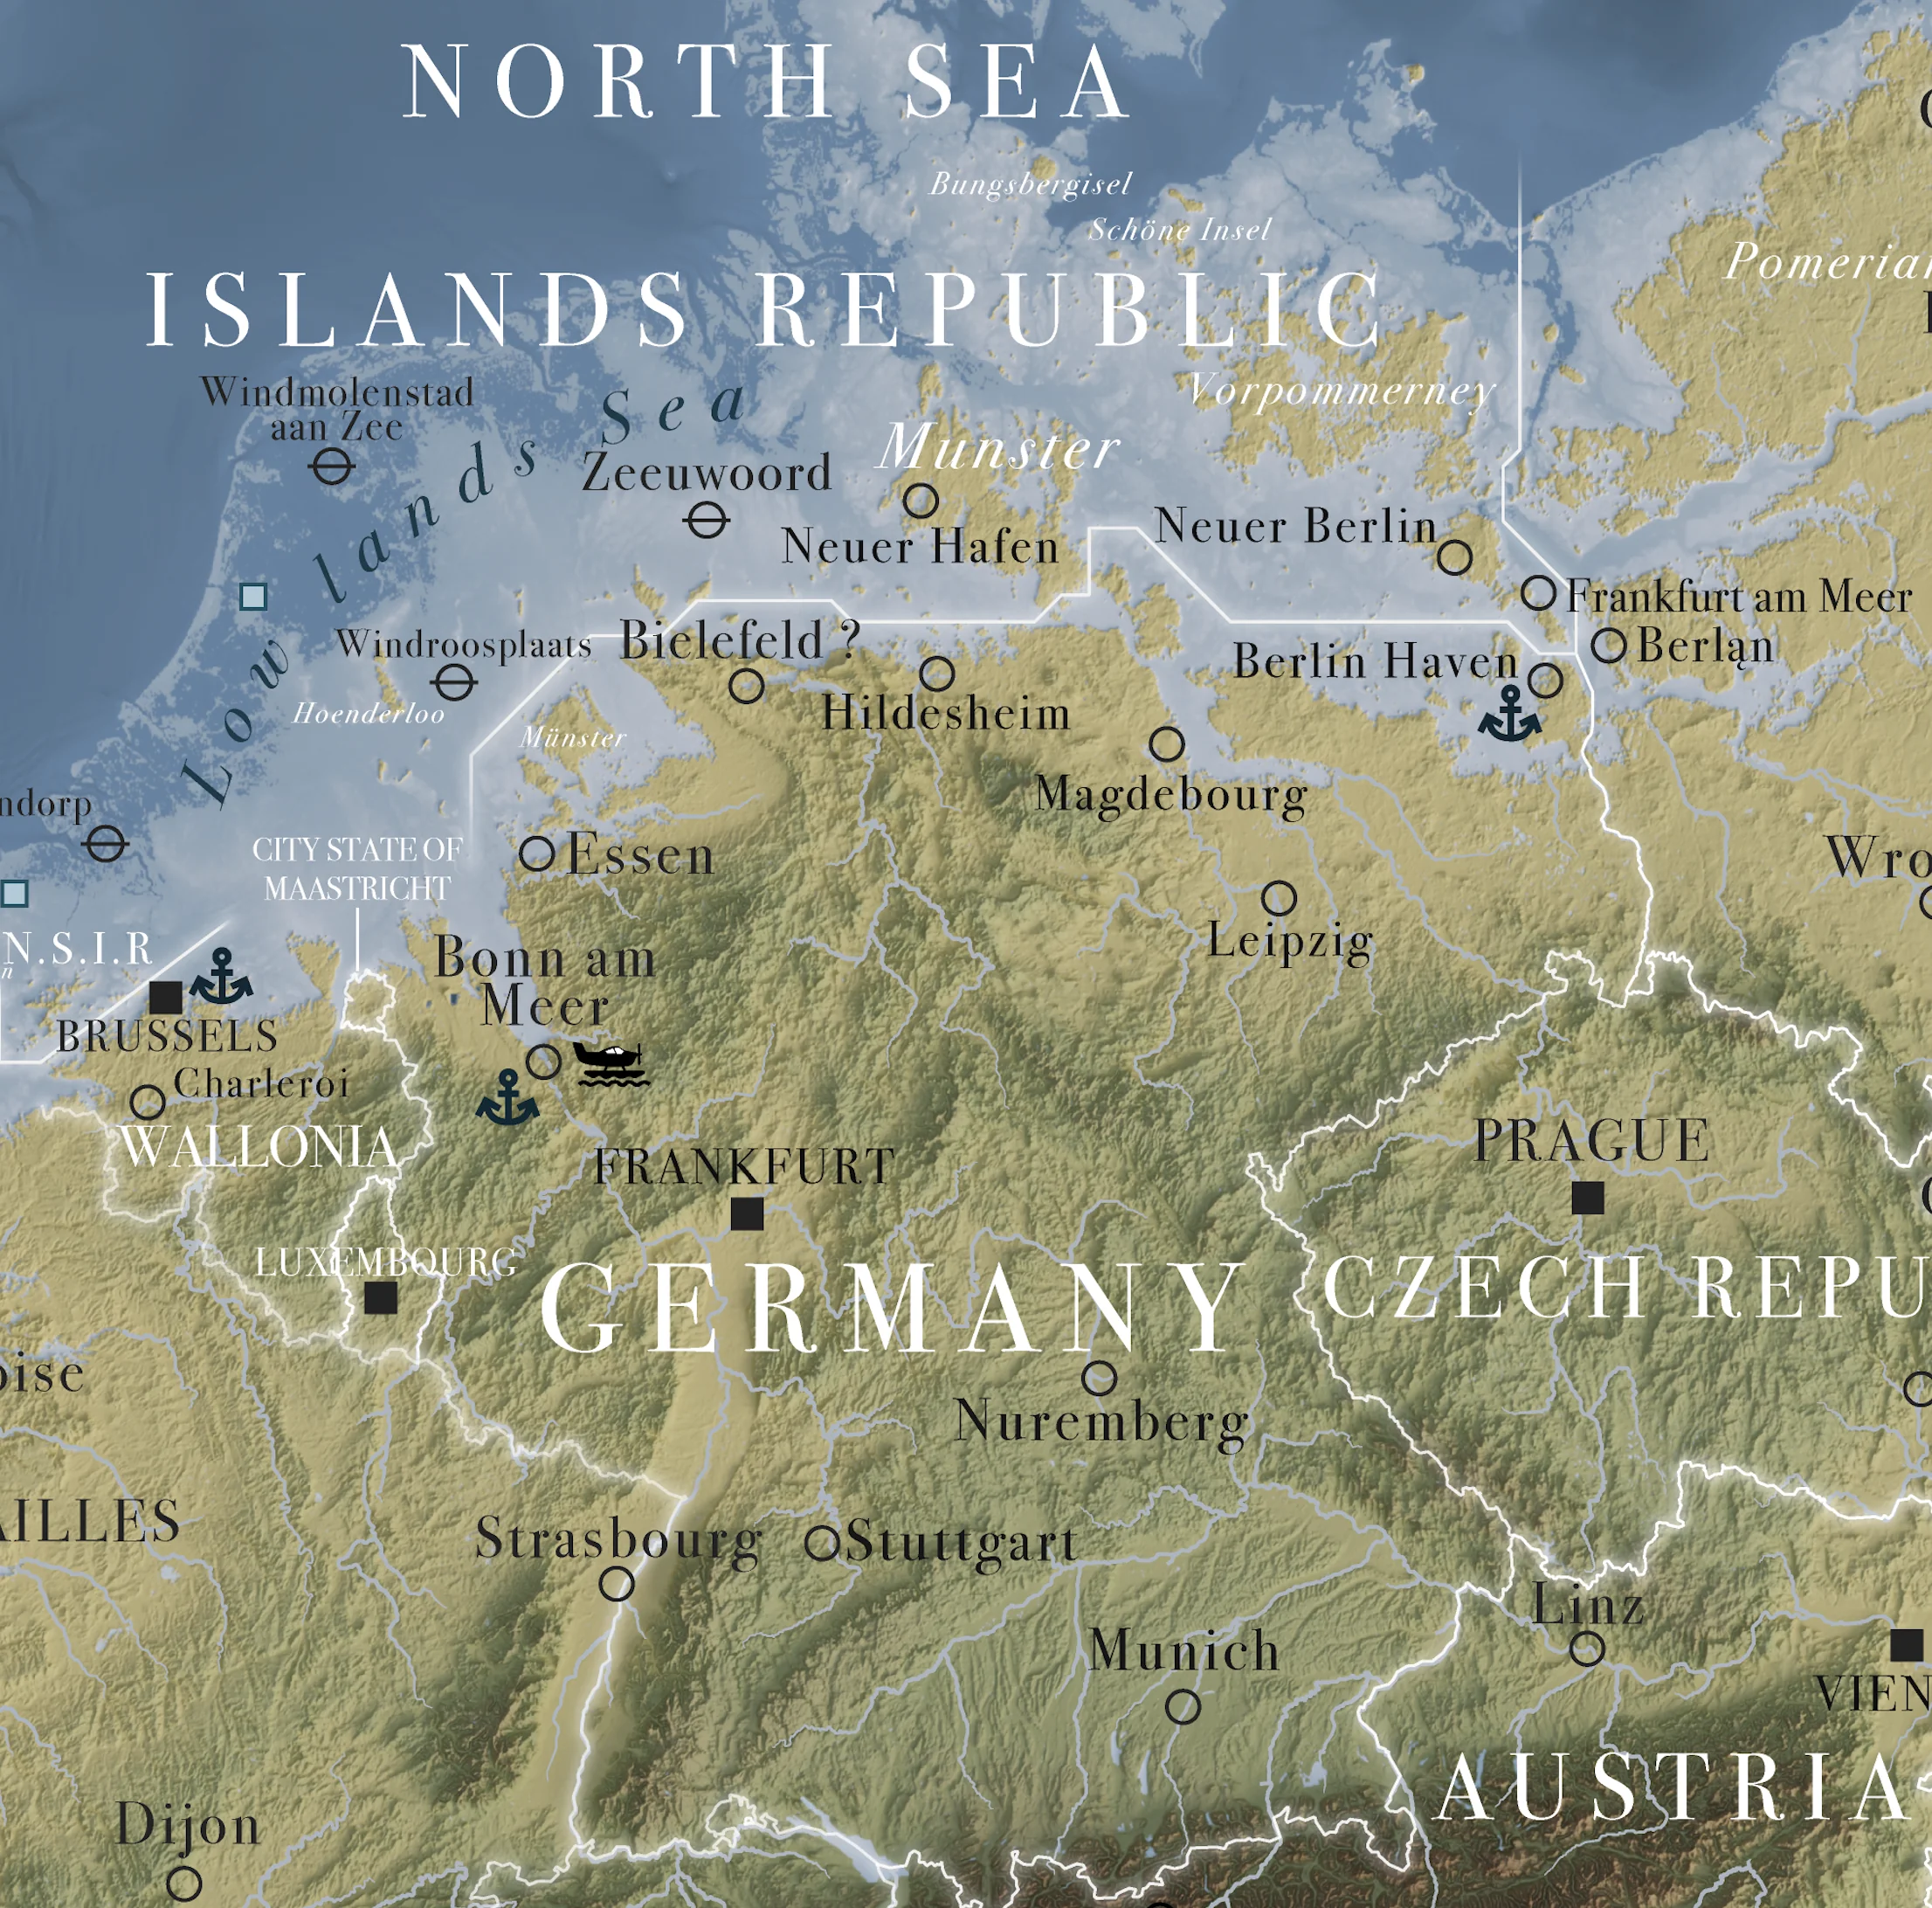 What if all glaciers on Earth melted (Germany)?